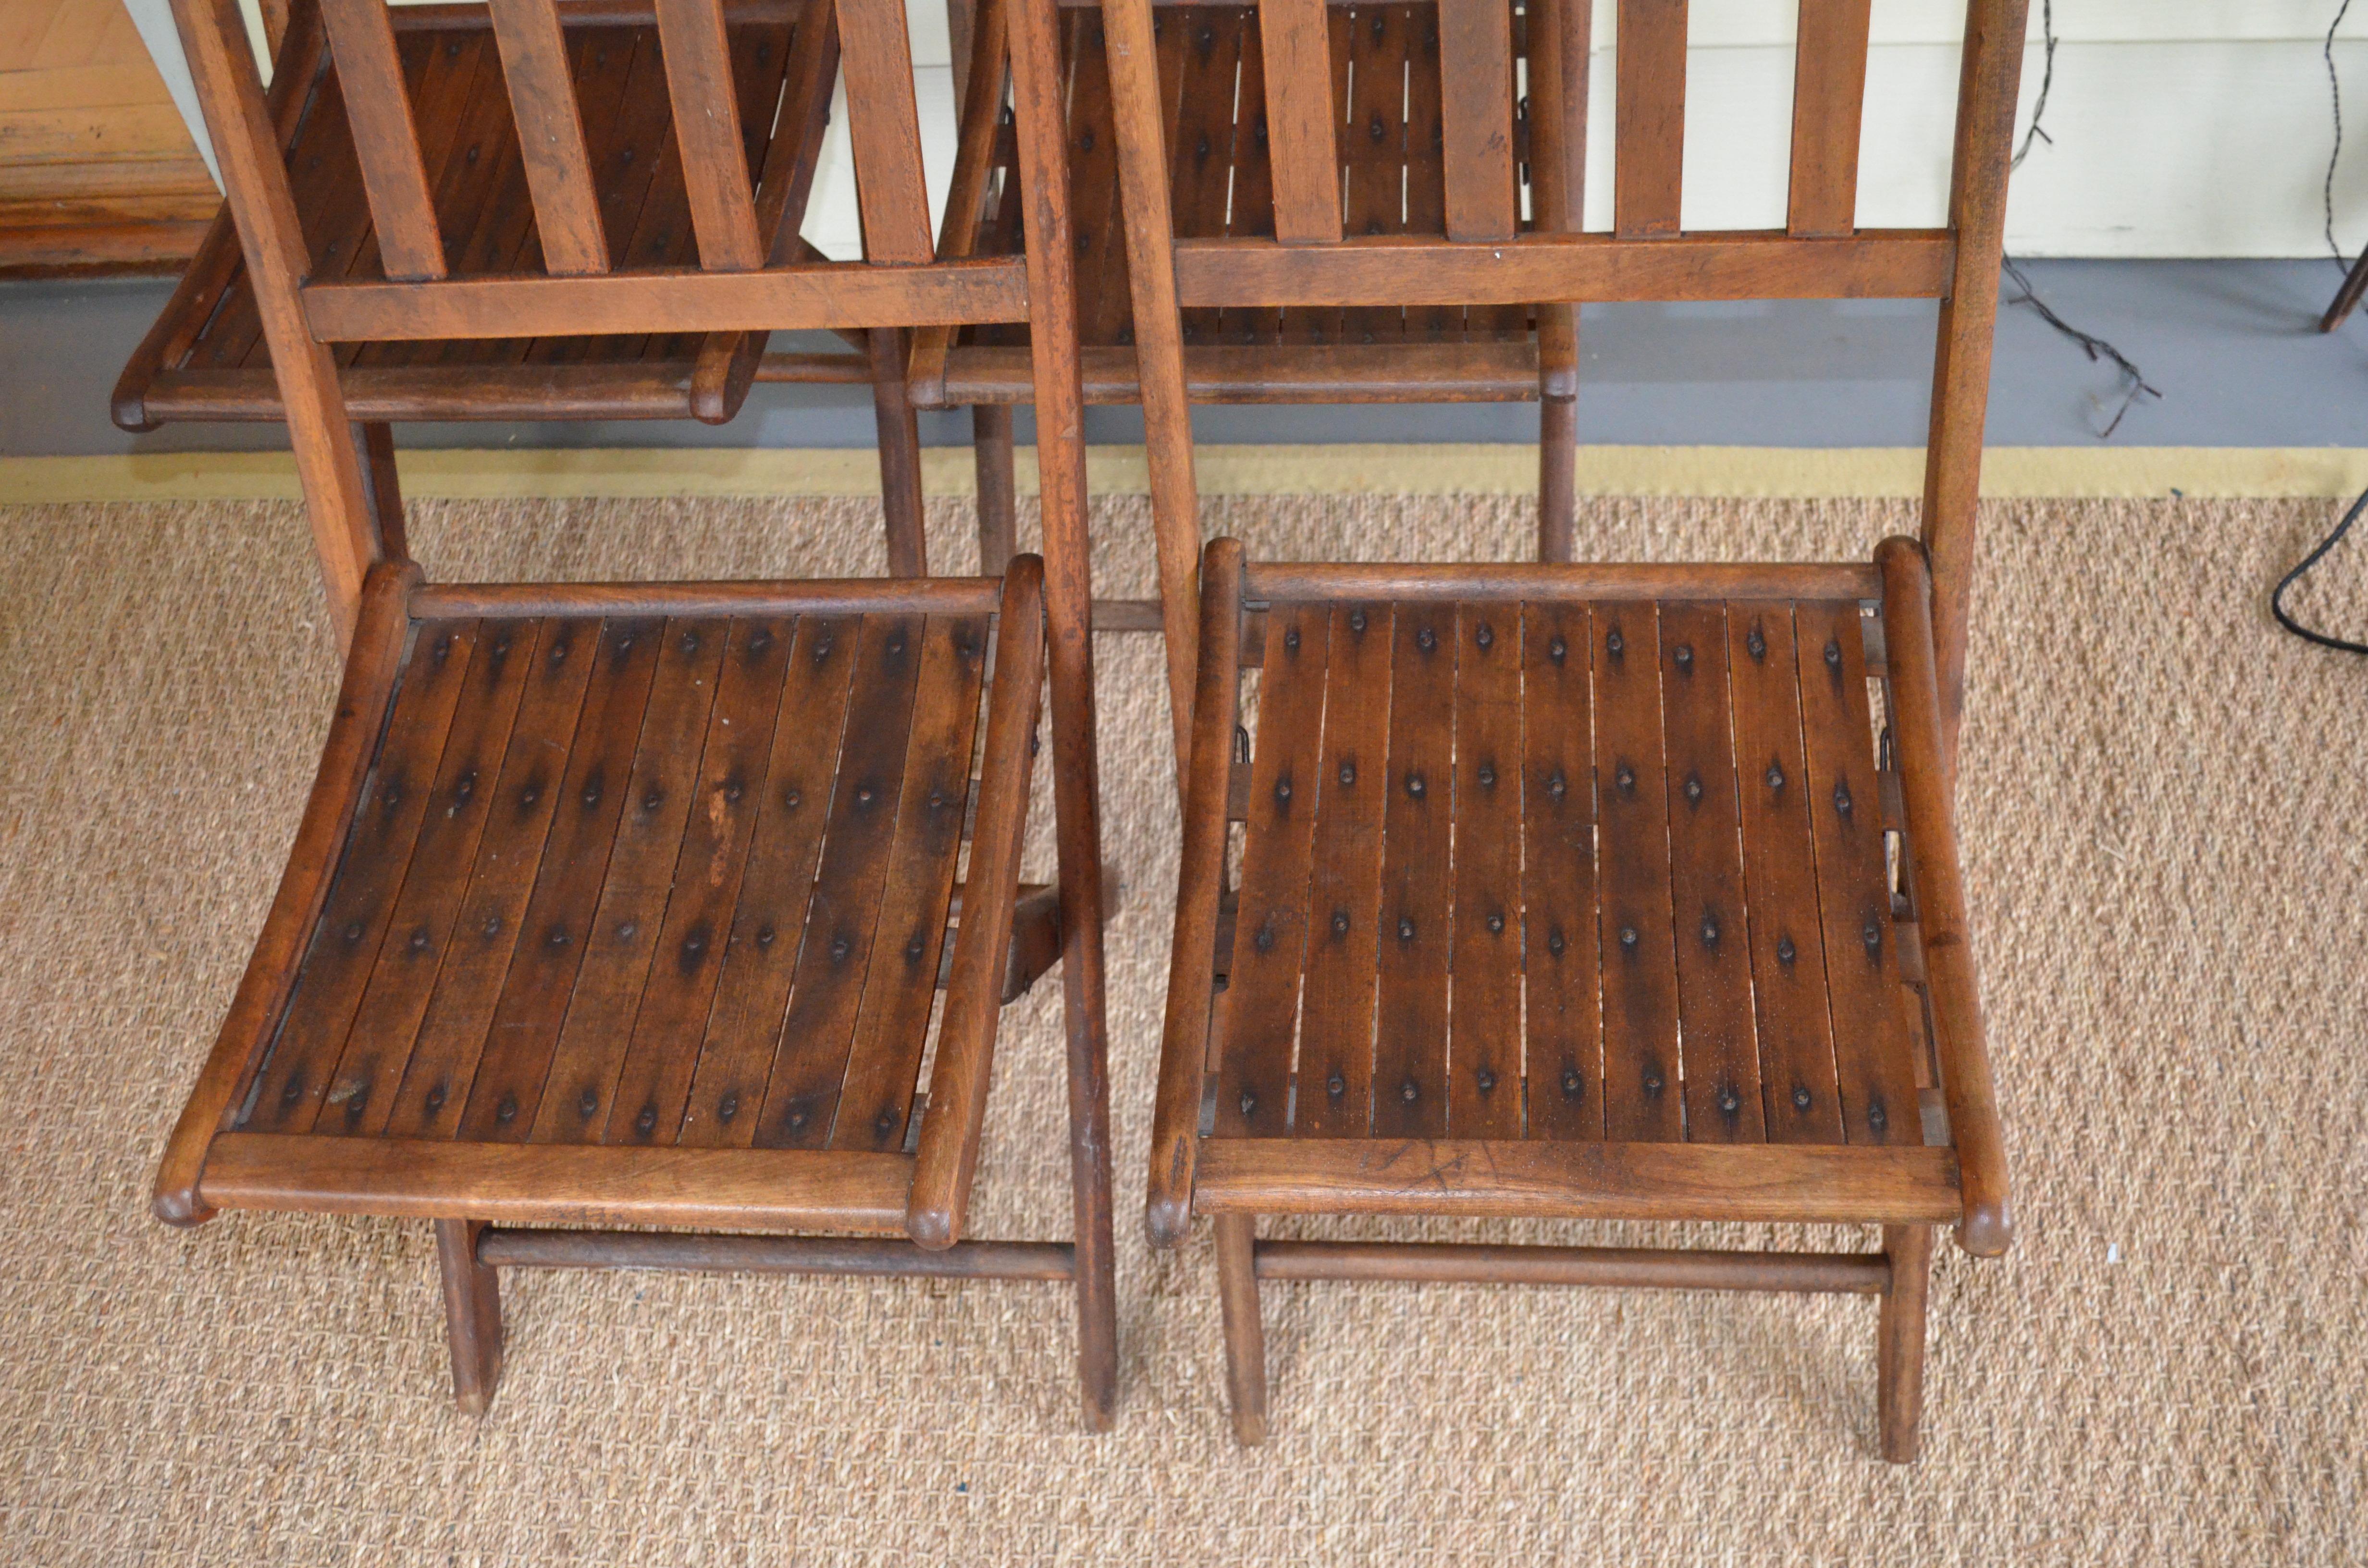 Chairs of Oak, Folding, Late 19th Century European, Set of 4, Multiple Sets For Sale 1